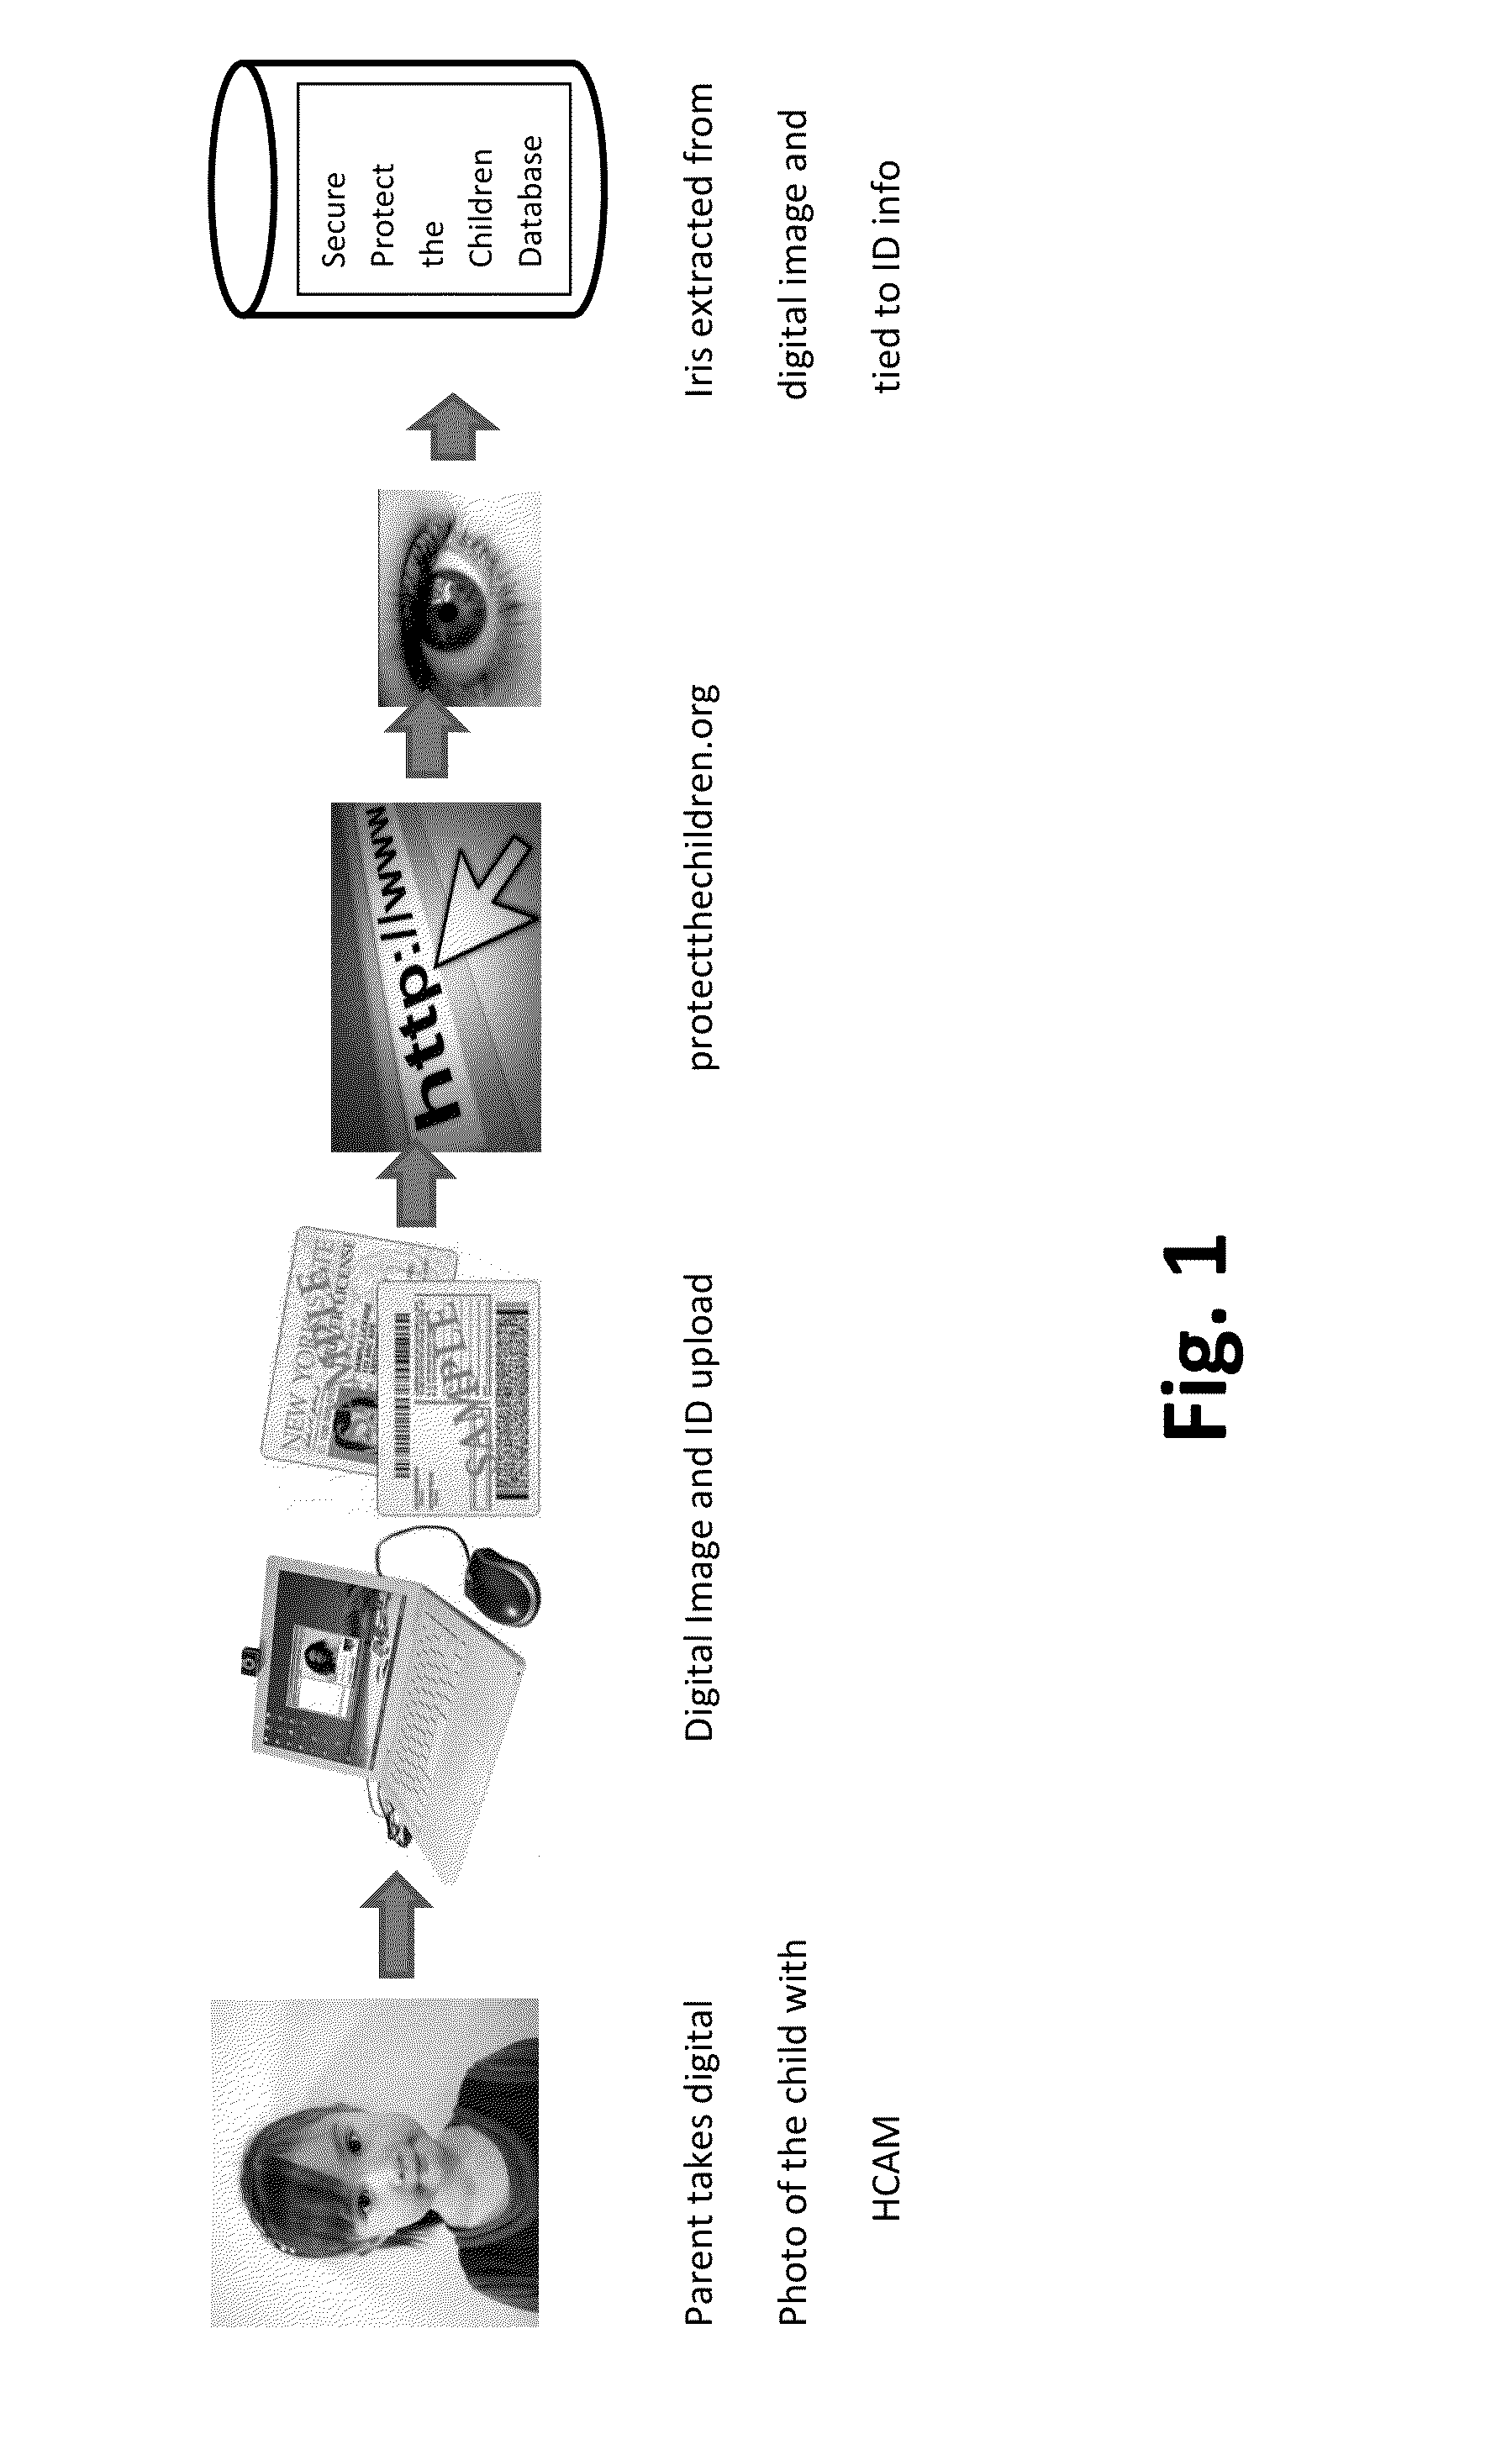 Method for Confirming the Identity of an Individual While Shielding that Individual's Personal Data